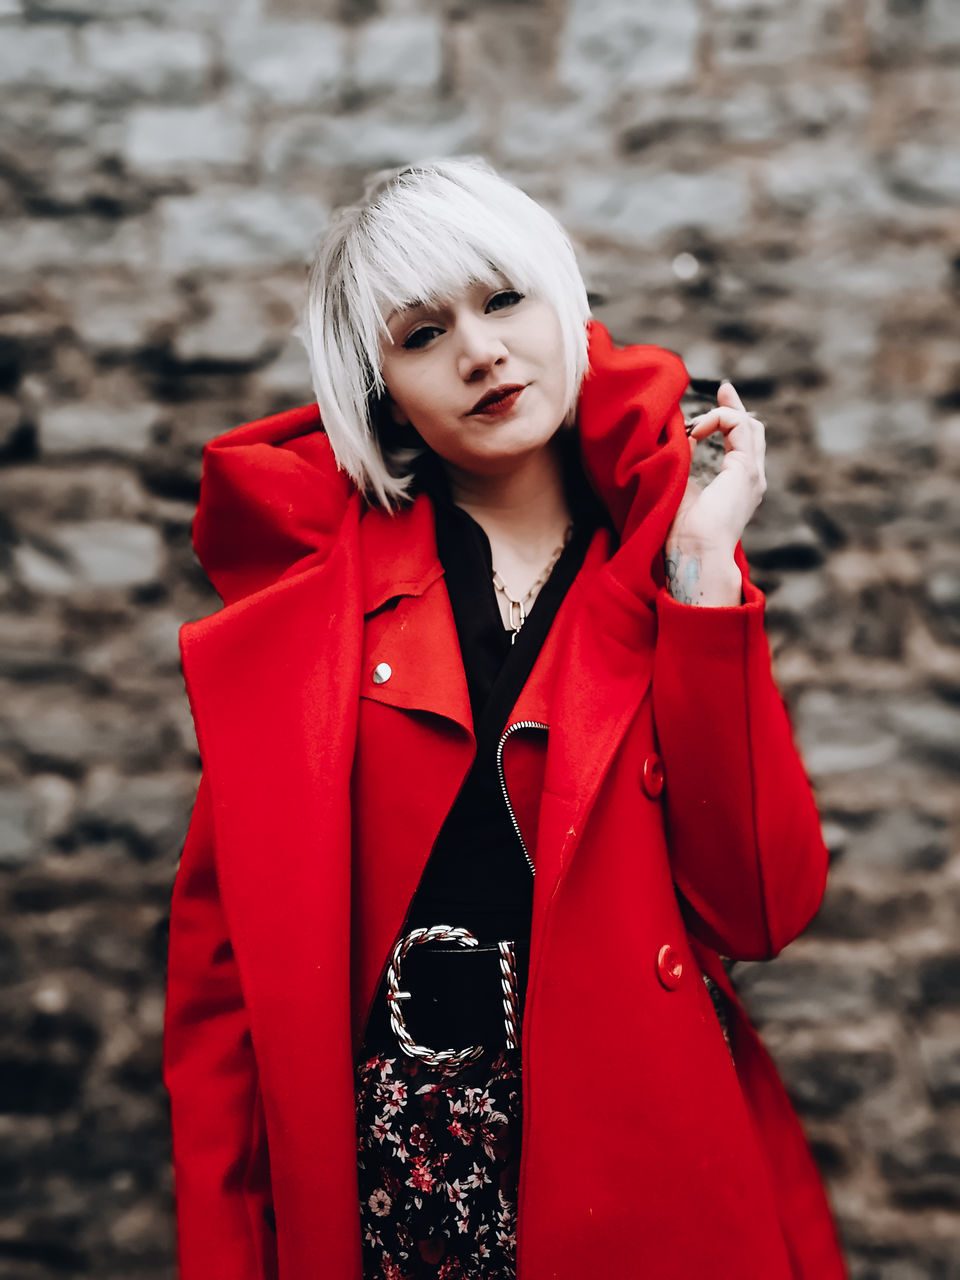 red, one person, clothing, women, adult, coat, outerwear, young adult, front view, portrait, blond hair, standing, jacket, fashion, waist up, trench coat, winter, hairstyle, looking at camera, female, lifestyles, warm clothing, day, looking, nature, outdoors, leisure activity, costume, focus on foreground, emotion, long hair, person